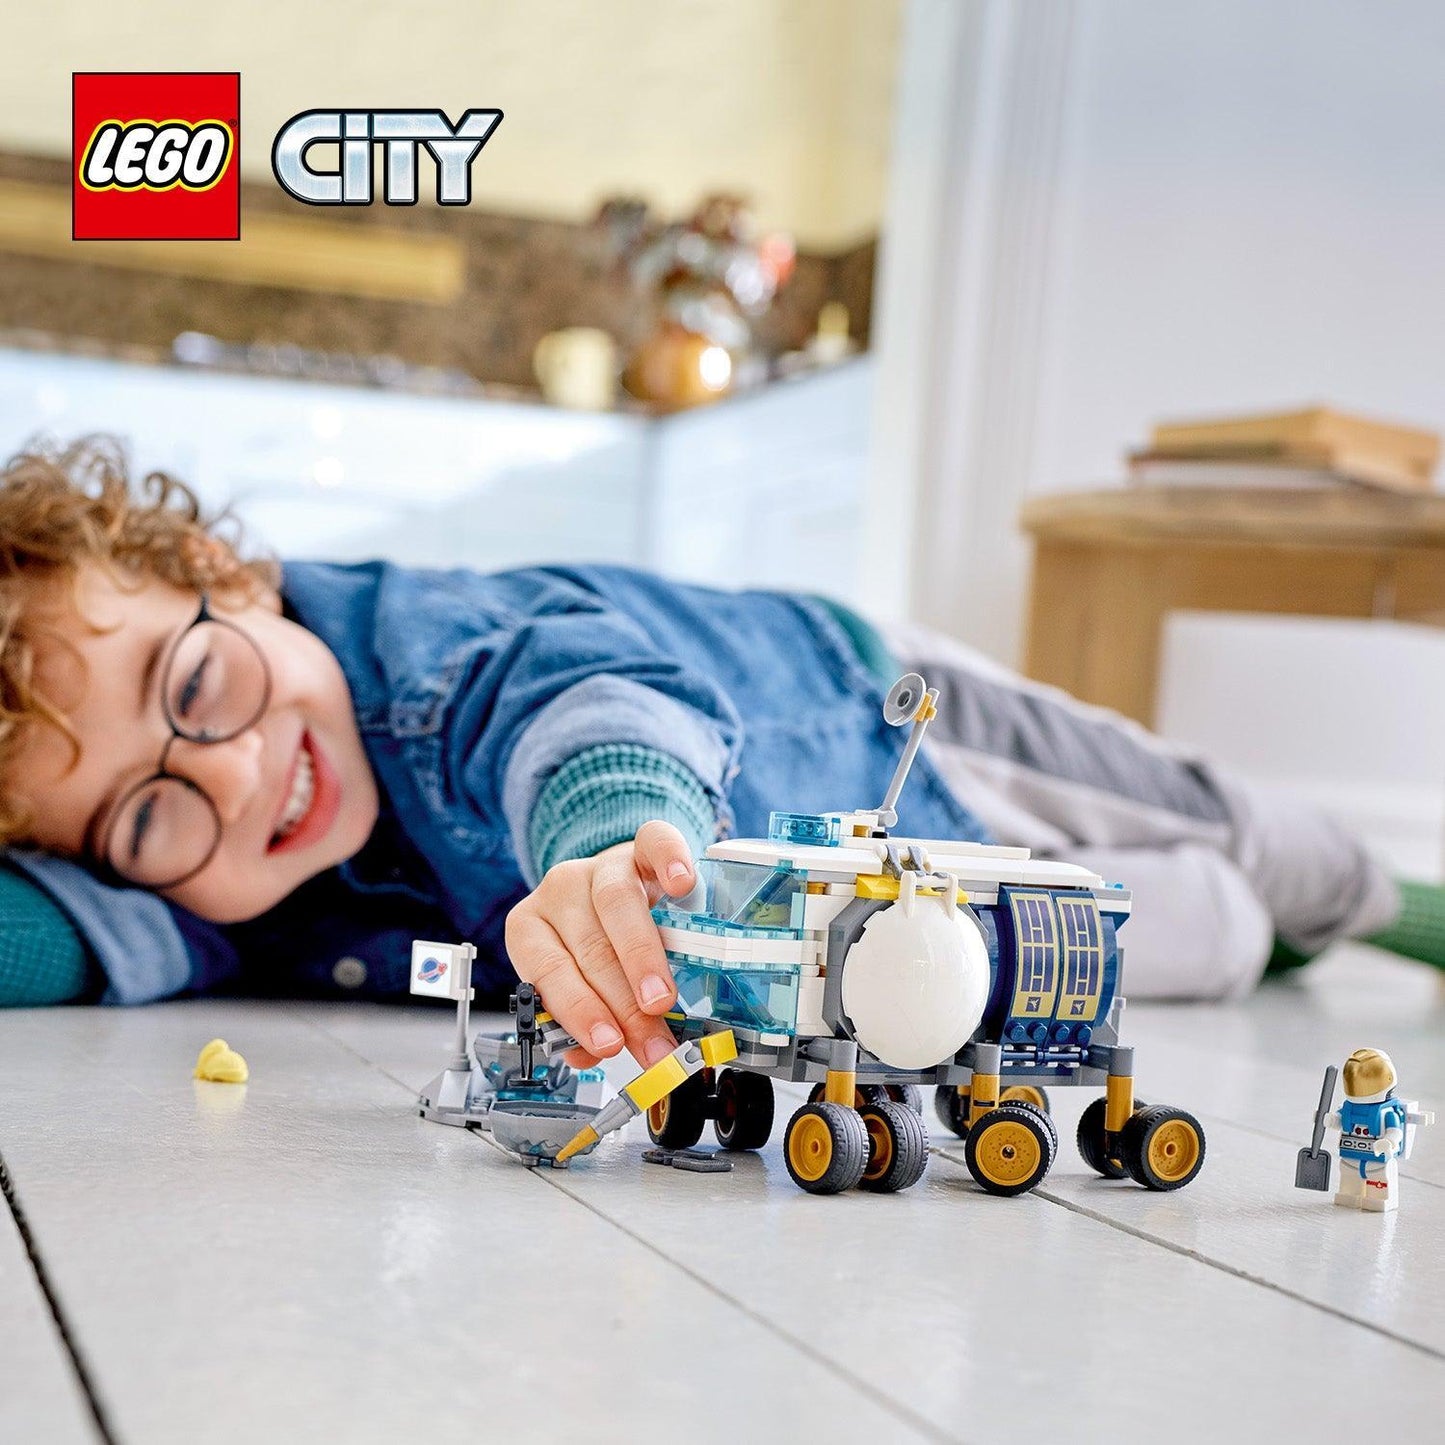 LEGO Maanwagen 60348 City Space | 2TTOYS ✓ Official shop<br>